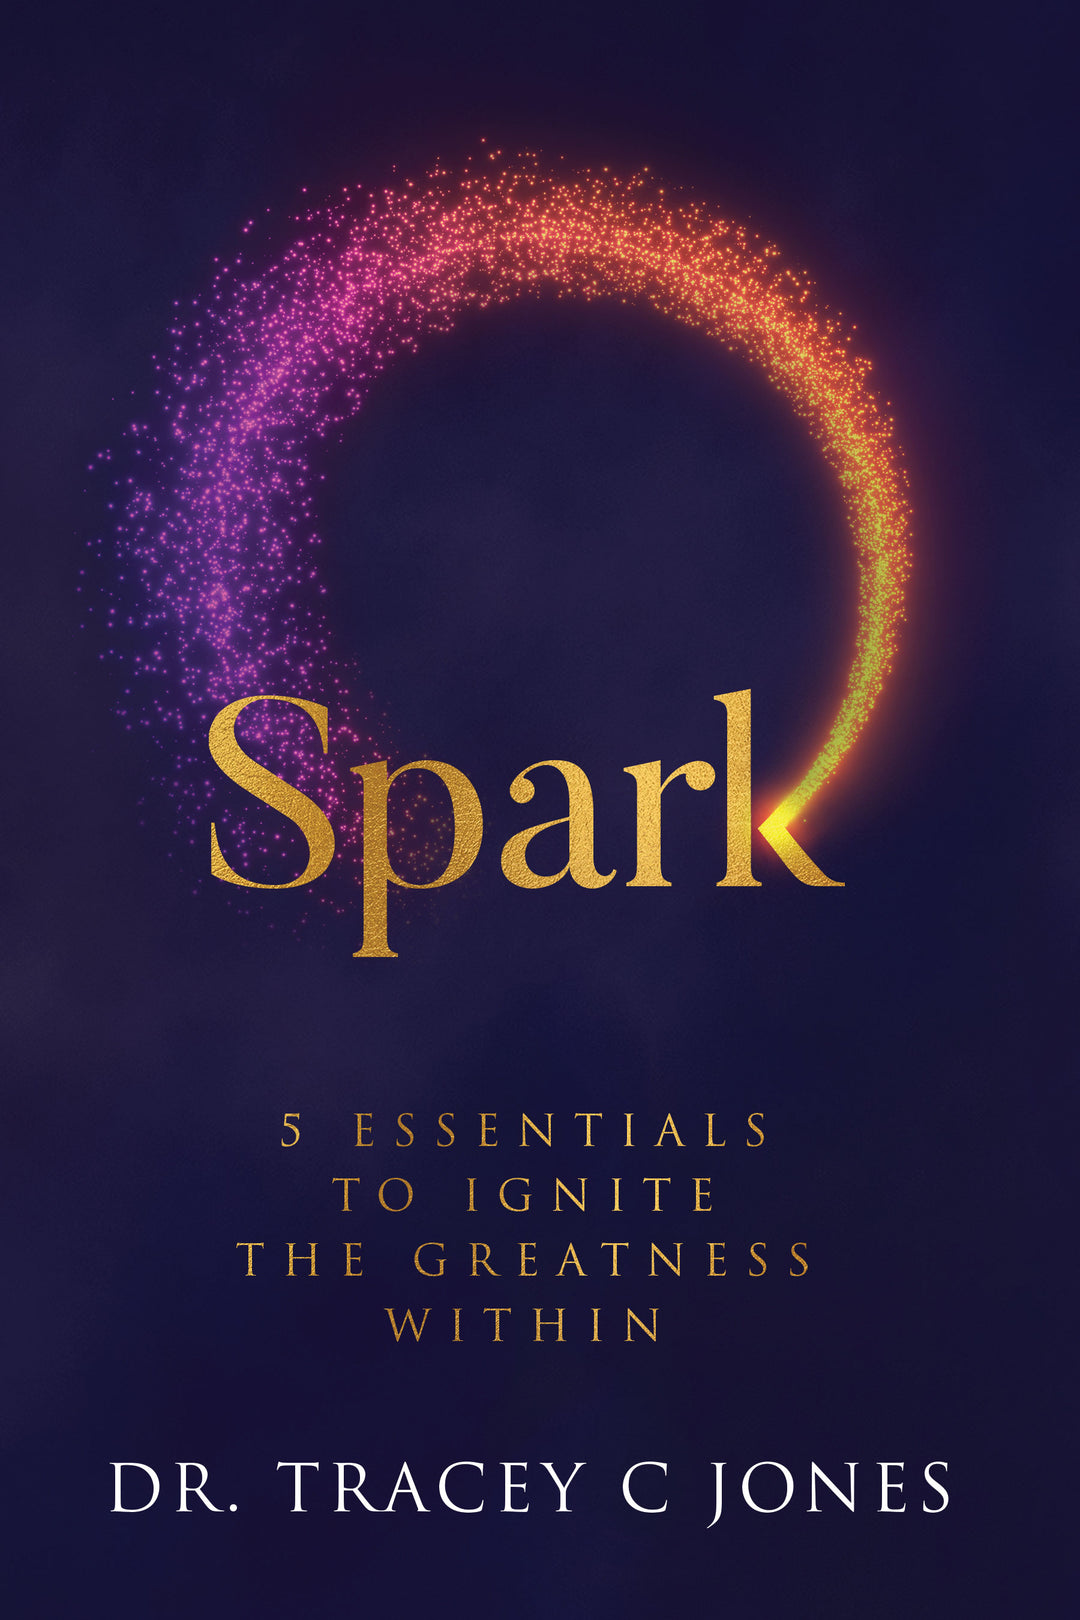 SPARK: 5 Essentials to Ignite the Greatness Within